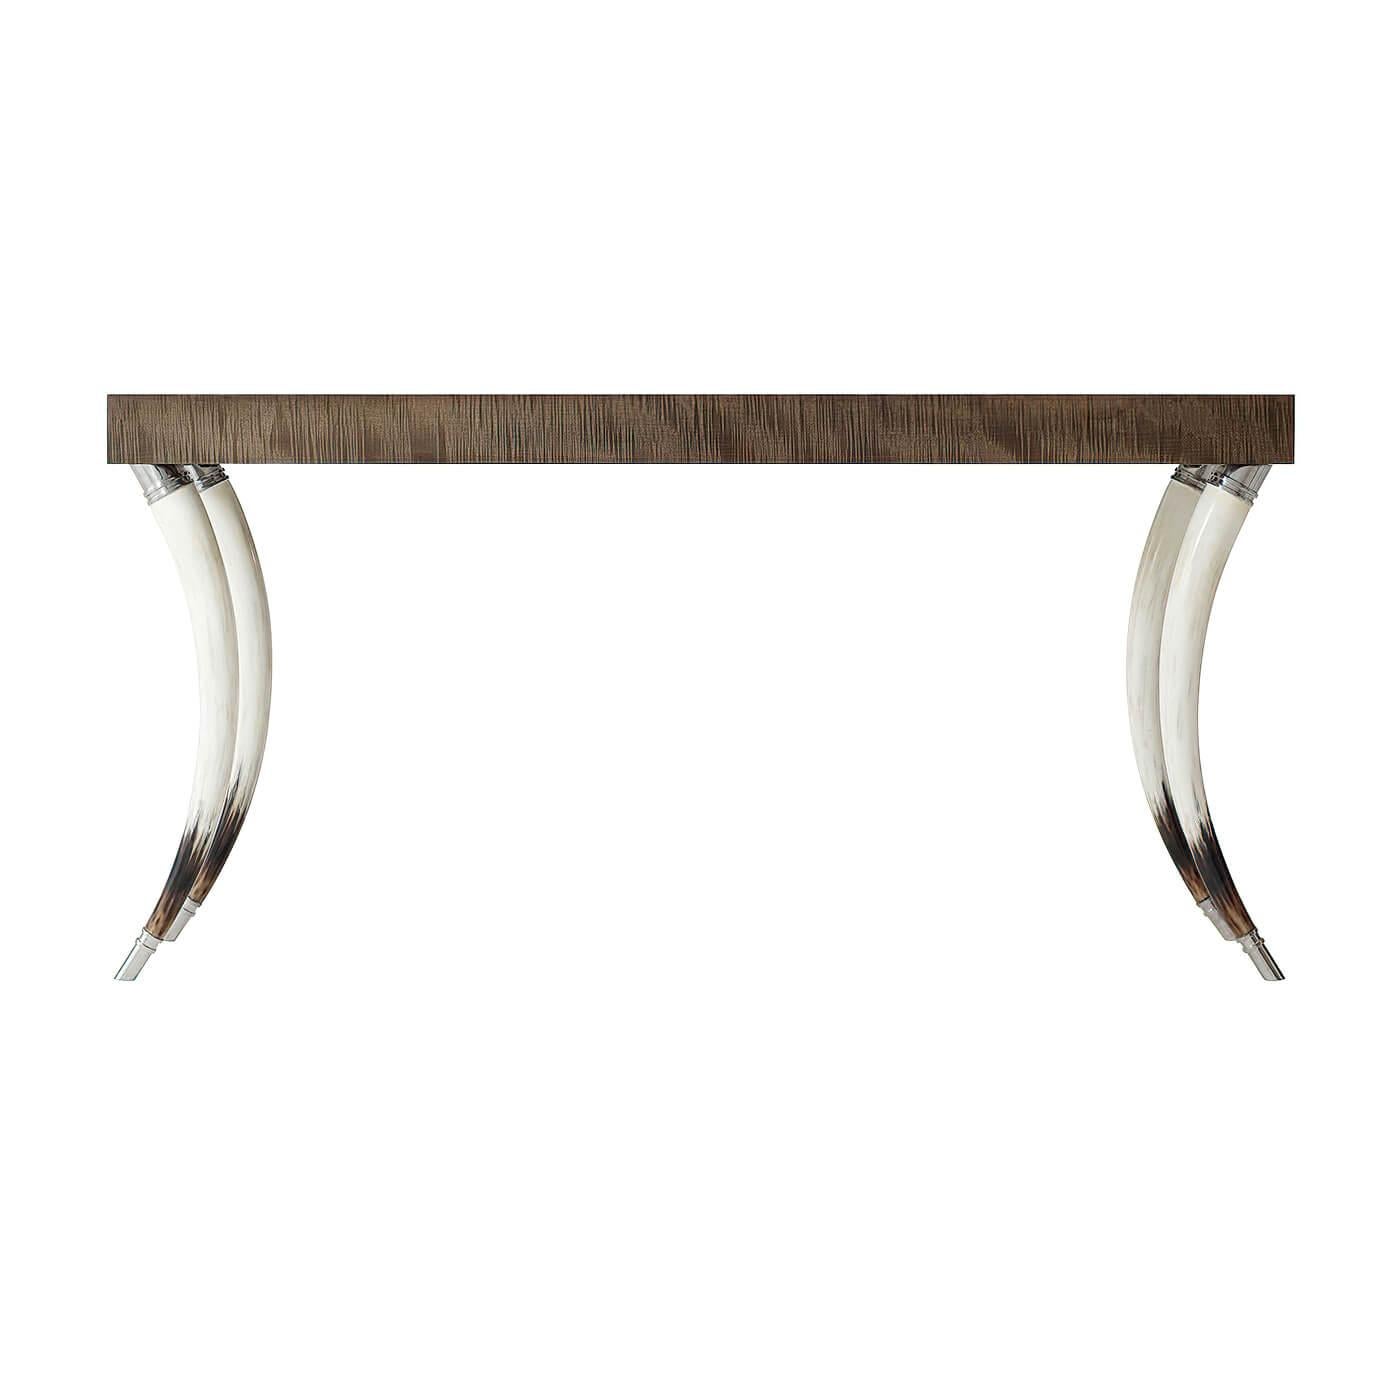 A modern platinum sycamore veneered and faux horn console table, the thick rectangular top on curved naturalistically hand-painted faux horn legs with stainless steel capitals and feet.

Dimensions: 64